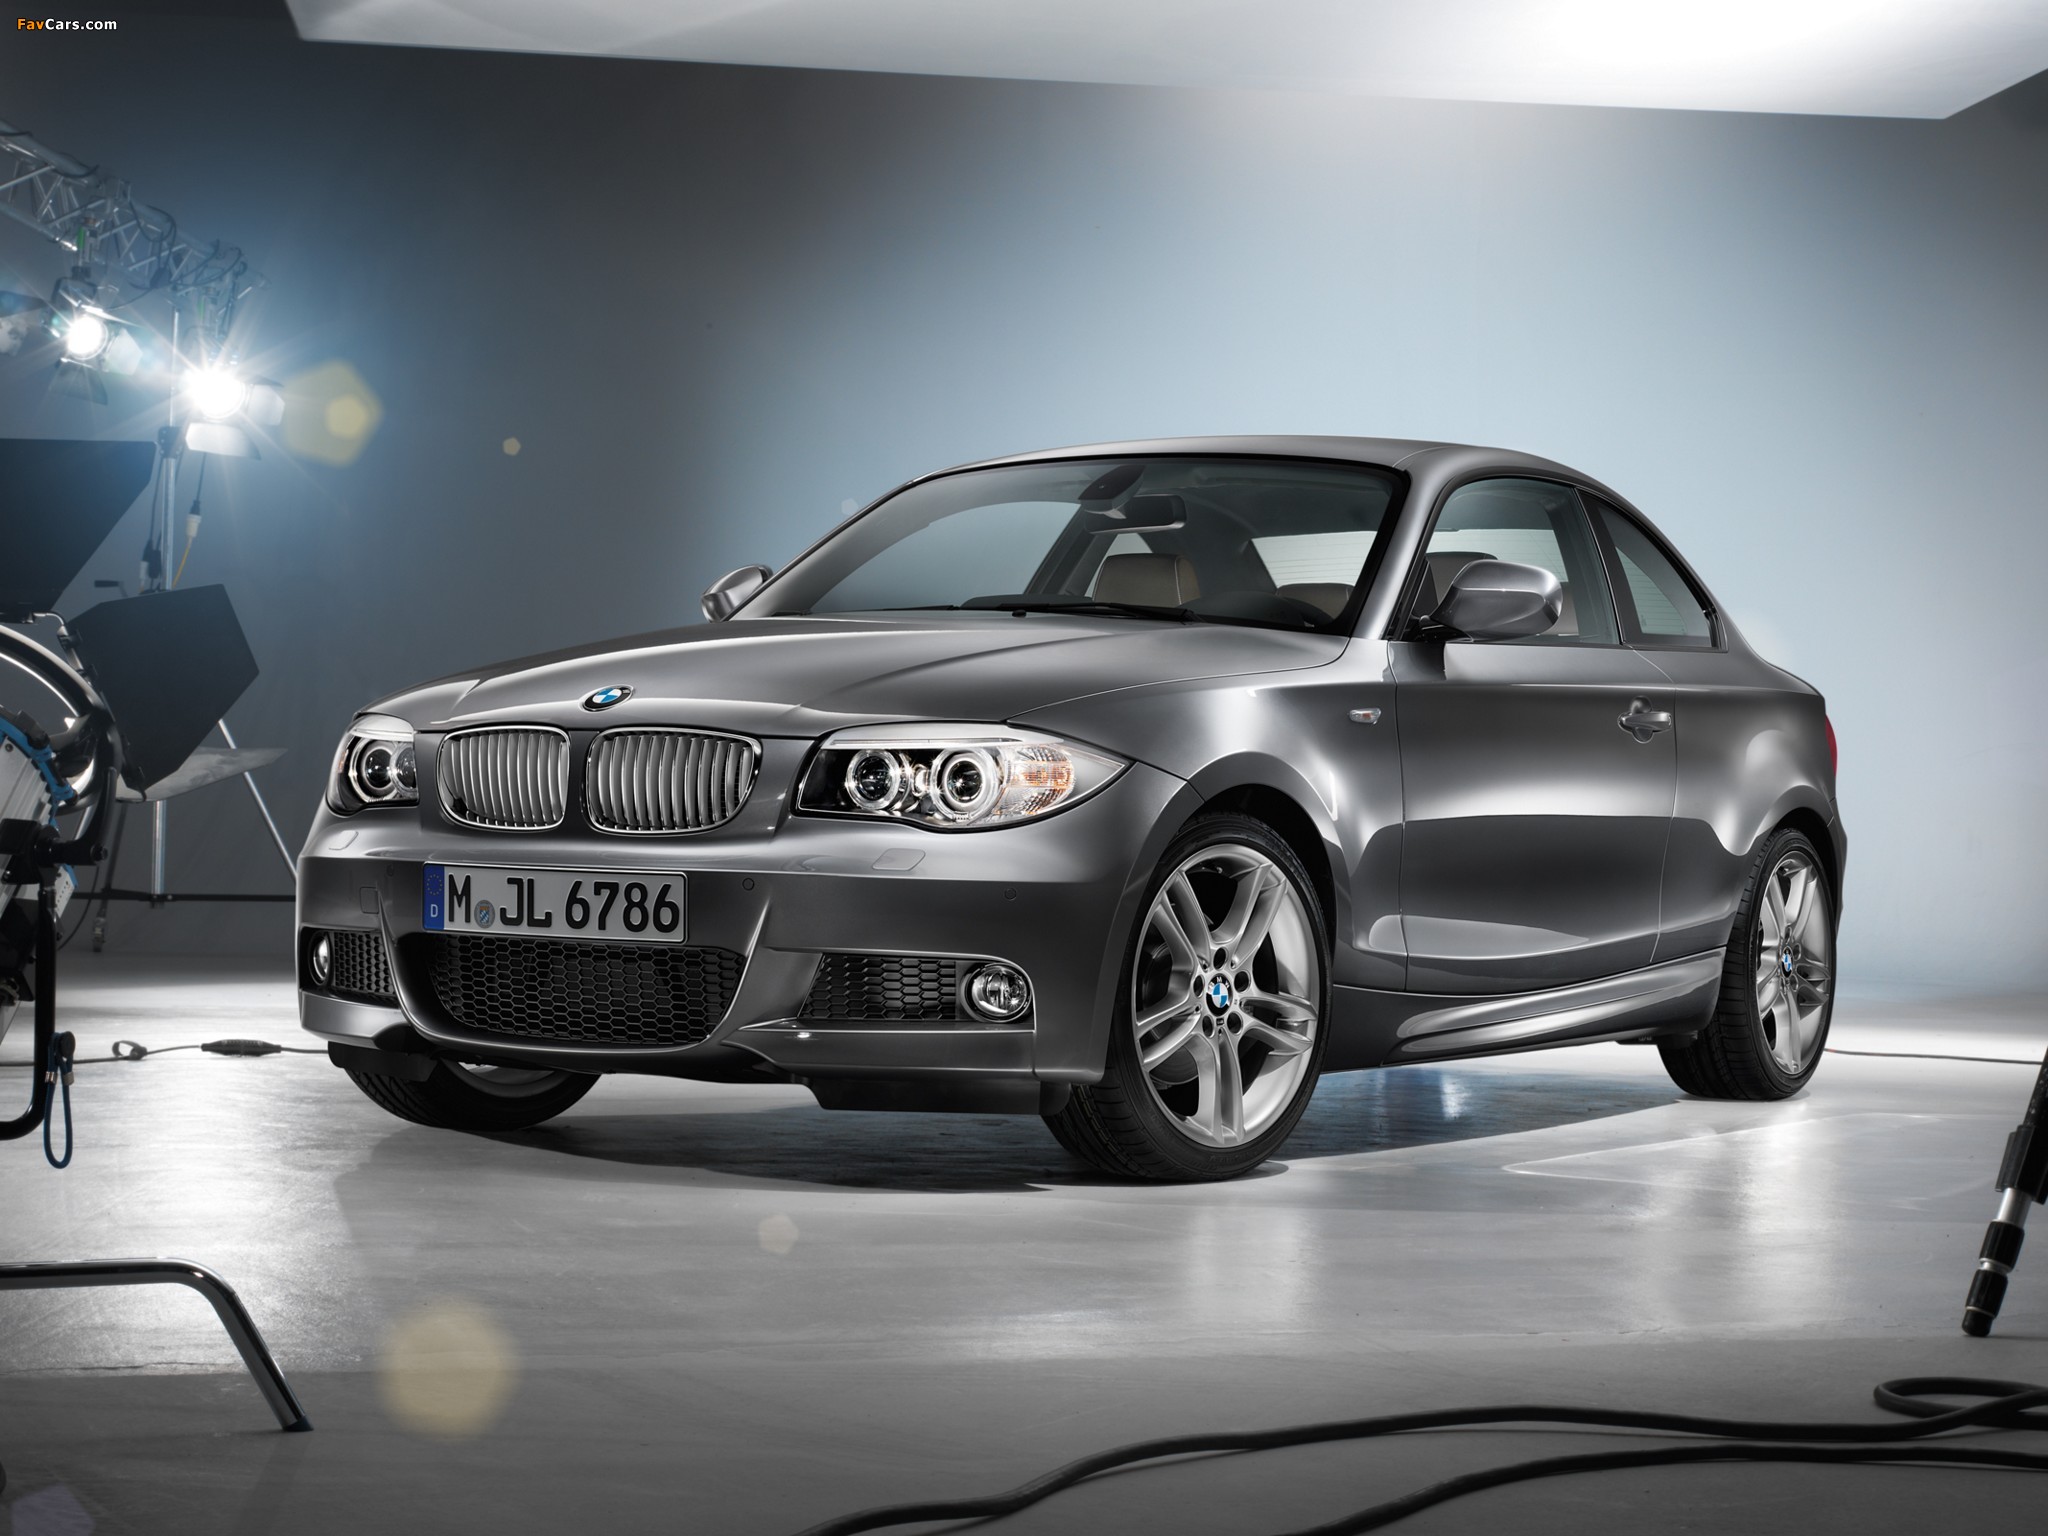 BMW 120d Coupe Lifestyle Edition (E82) 2013 wallpapers (2048 x 1536)